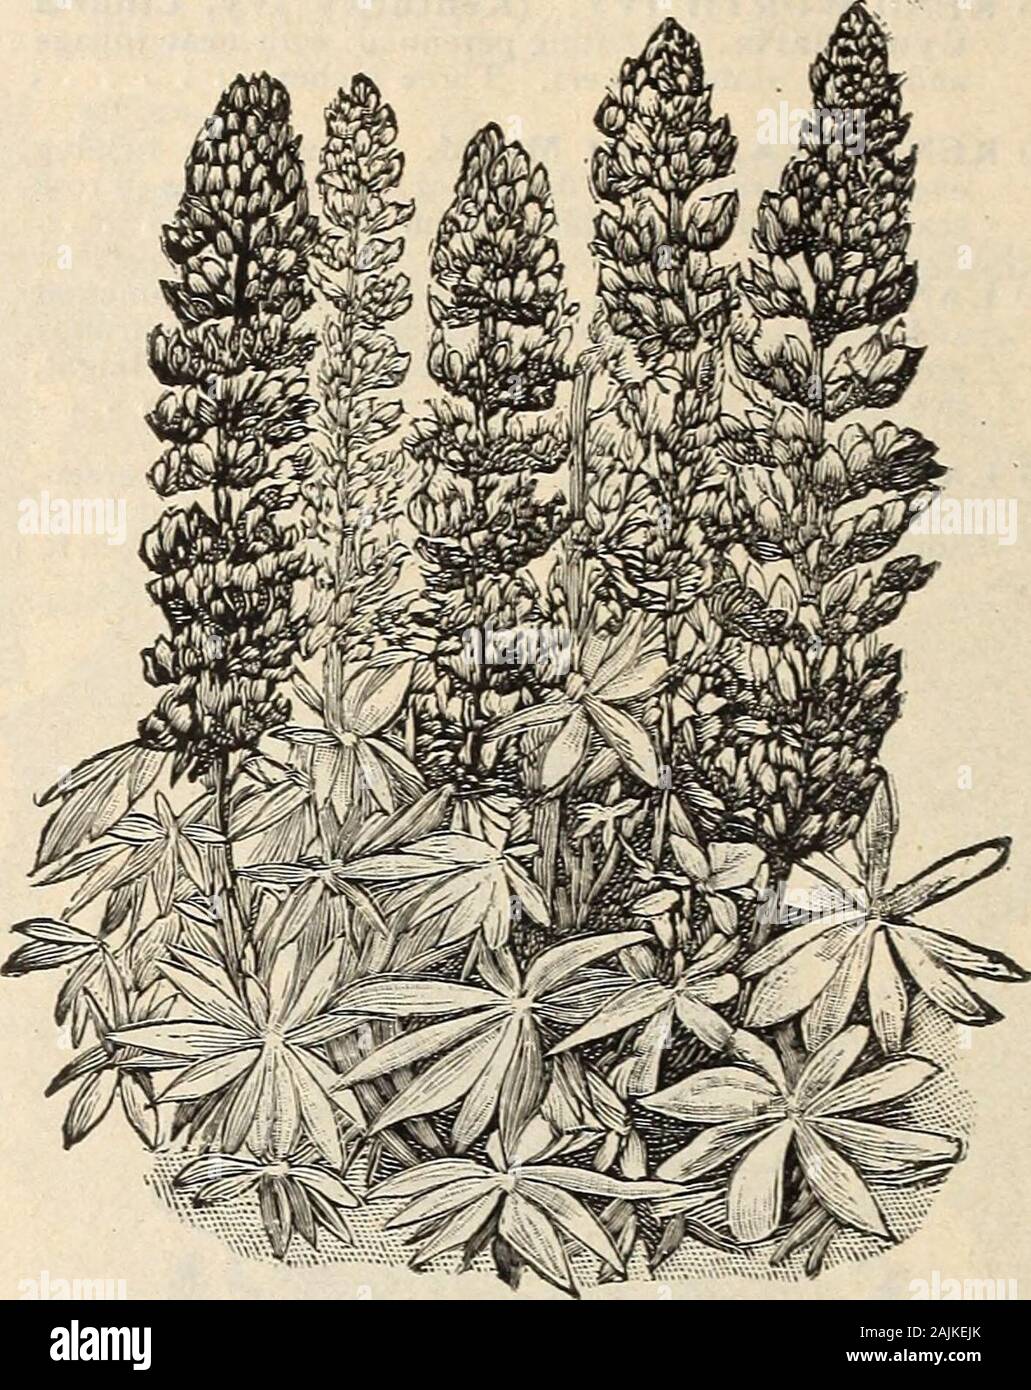 Farquhar's catalogue of seeds 1900 : plants, bulbs tools fertilizers, sundries . LUPINUS, ANNUA No. Pkt 4825 LOTUS Jacobeus. Free-flowering hardy annual with dark-brown Pea-shaped flowers; one foot 05 4830 Luteus. Yellow • ... .05 LOVE-LIES-BLEEDING. 320 See A maranthus, No. LUNARIA Biennis. See Honesty No. 4345. LUPINUS. (Lupin.) Showy hardy plants of easj cul-tivation, producing handsome spikes of brilliantlycolored flowers.4832 Aff inis. Free-growing hardy annual, deep blue, one foot • . • 05. LUPINUS ARBOKEUS SNOW QUEEN. Njo. Pkt. LUPUNIS — Continued. 4833 Arboreus. Tall spikes of bright y Stock Photo